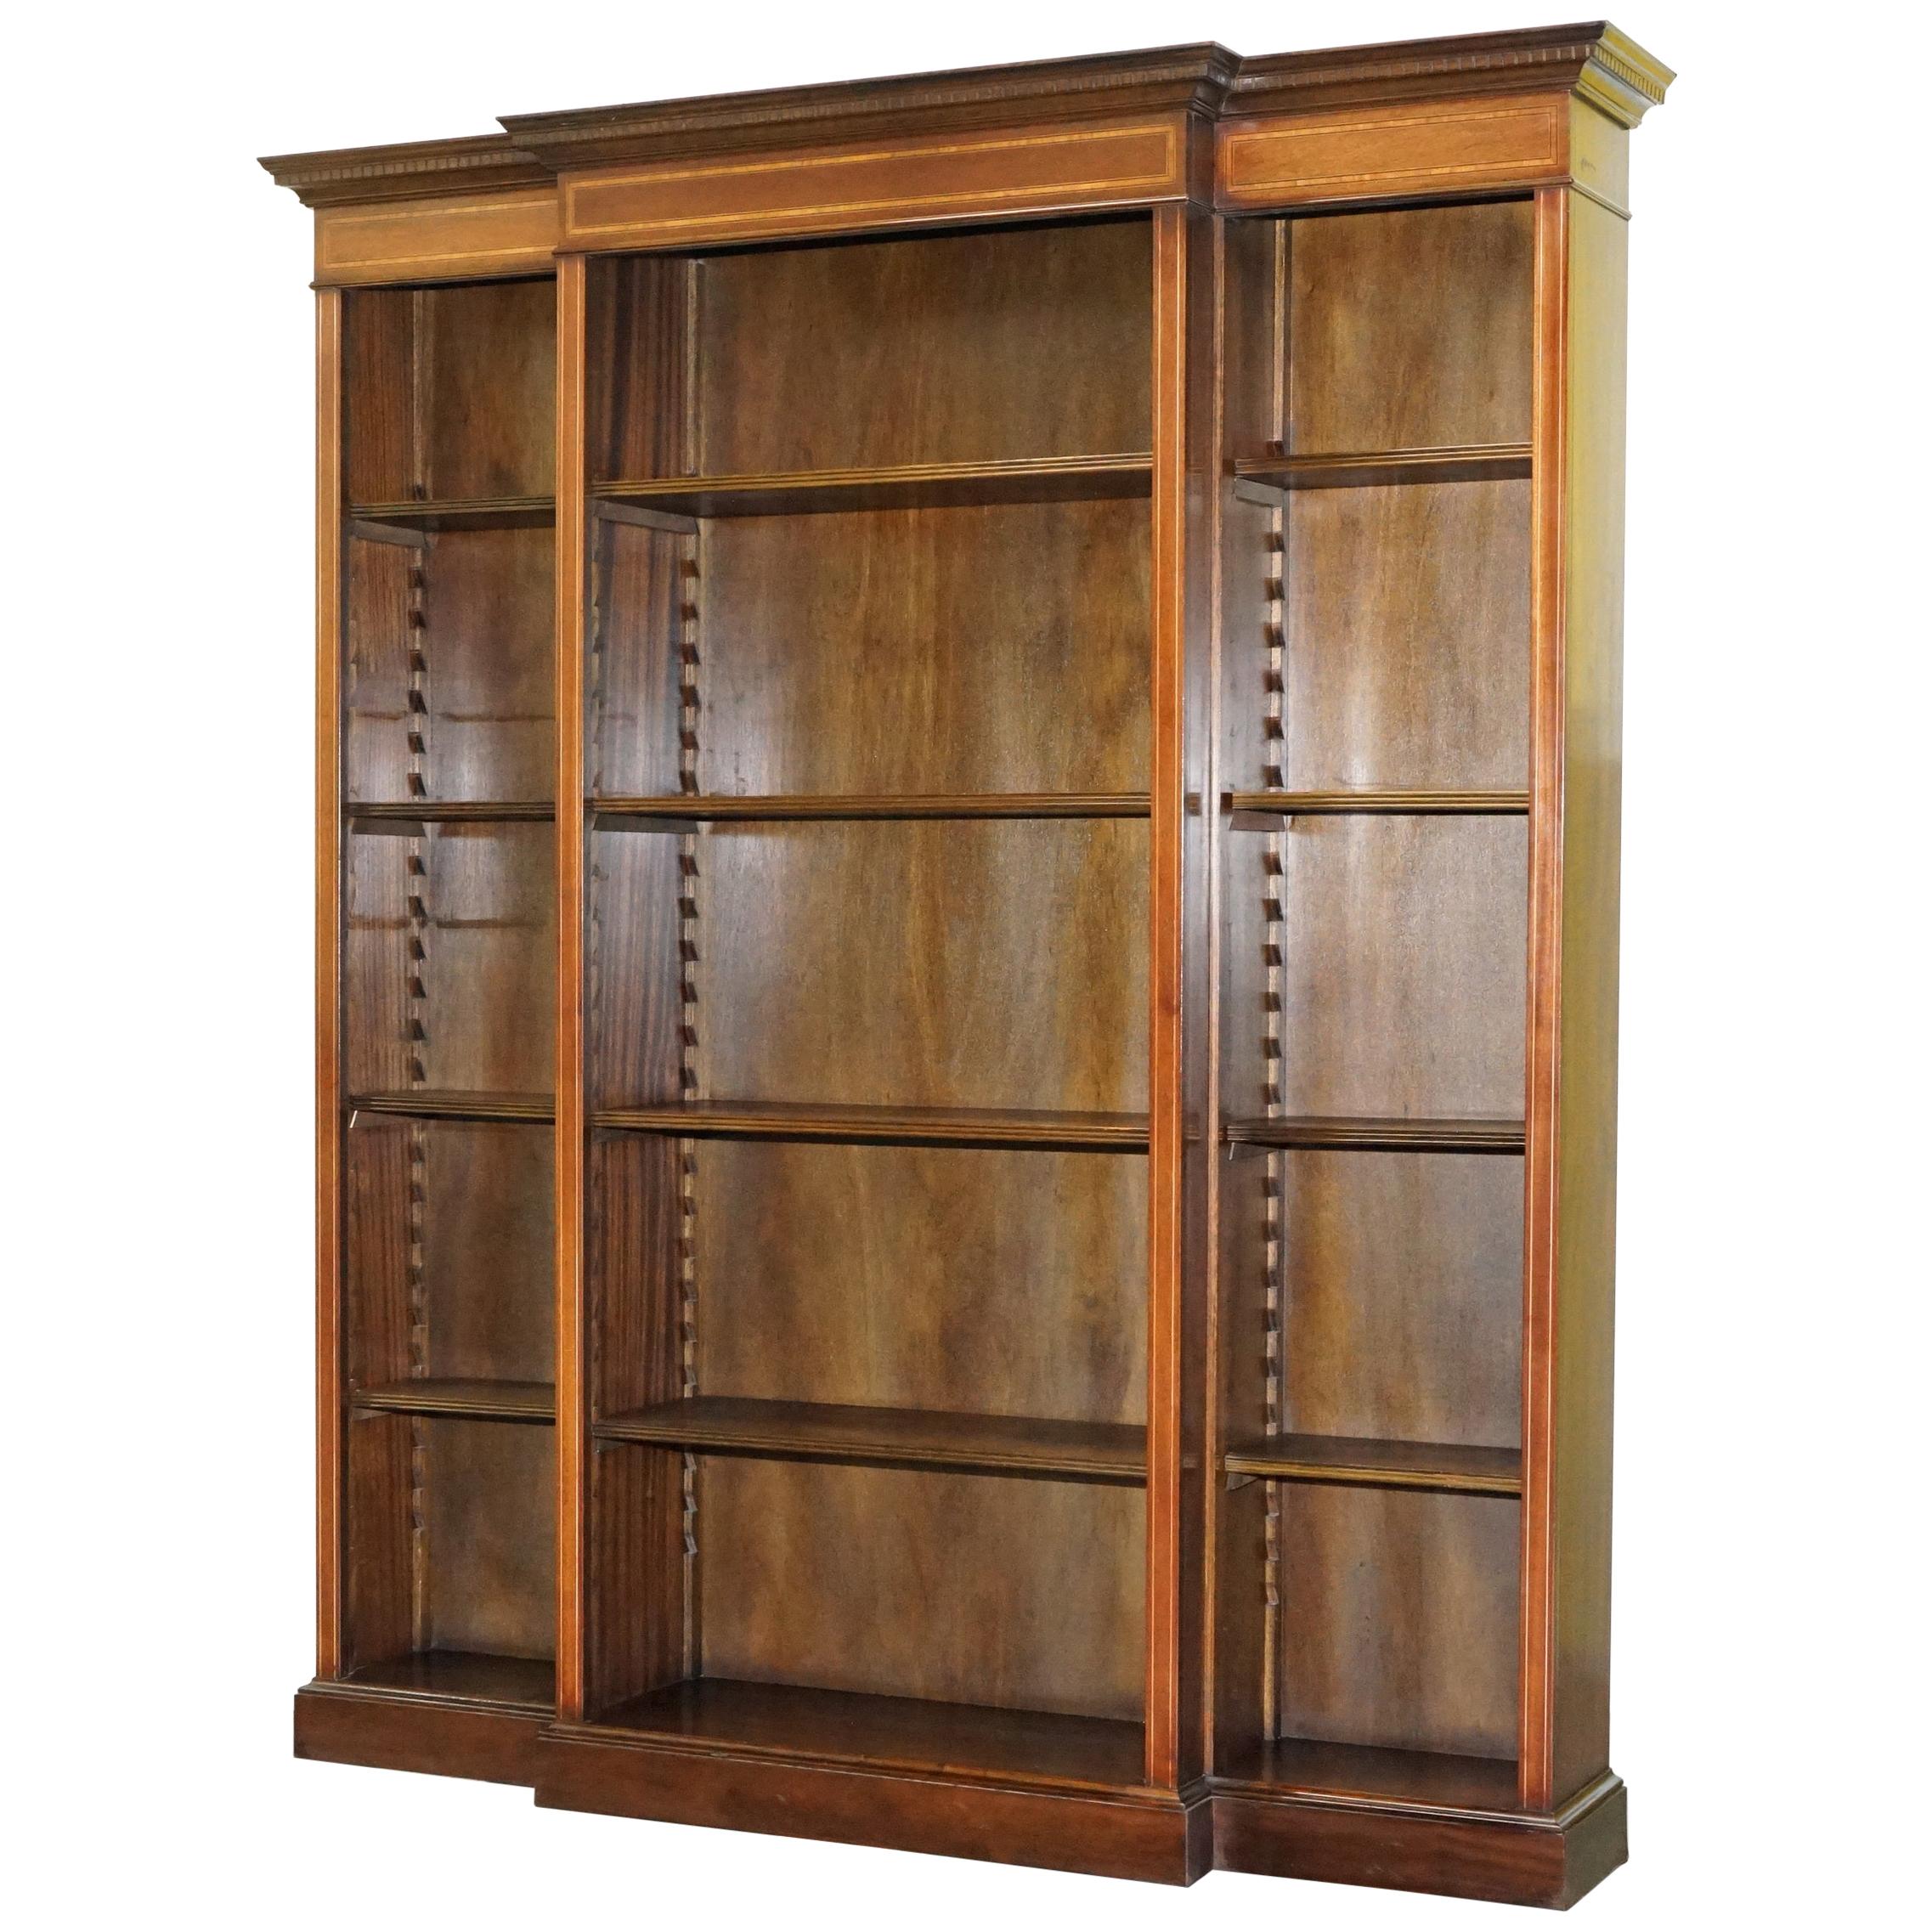 Lovely Mahogany Breakfront Library Bookcase with Adjustable Shelves Throughout